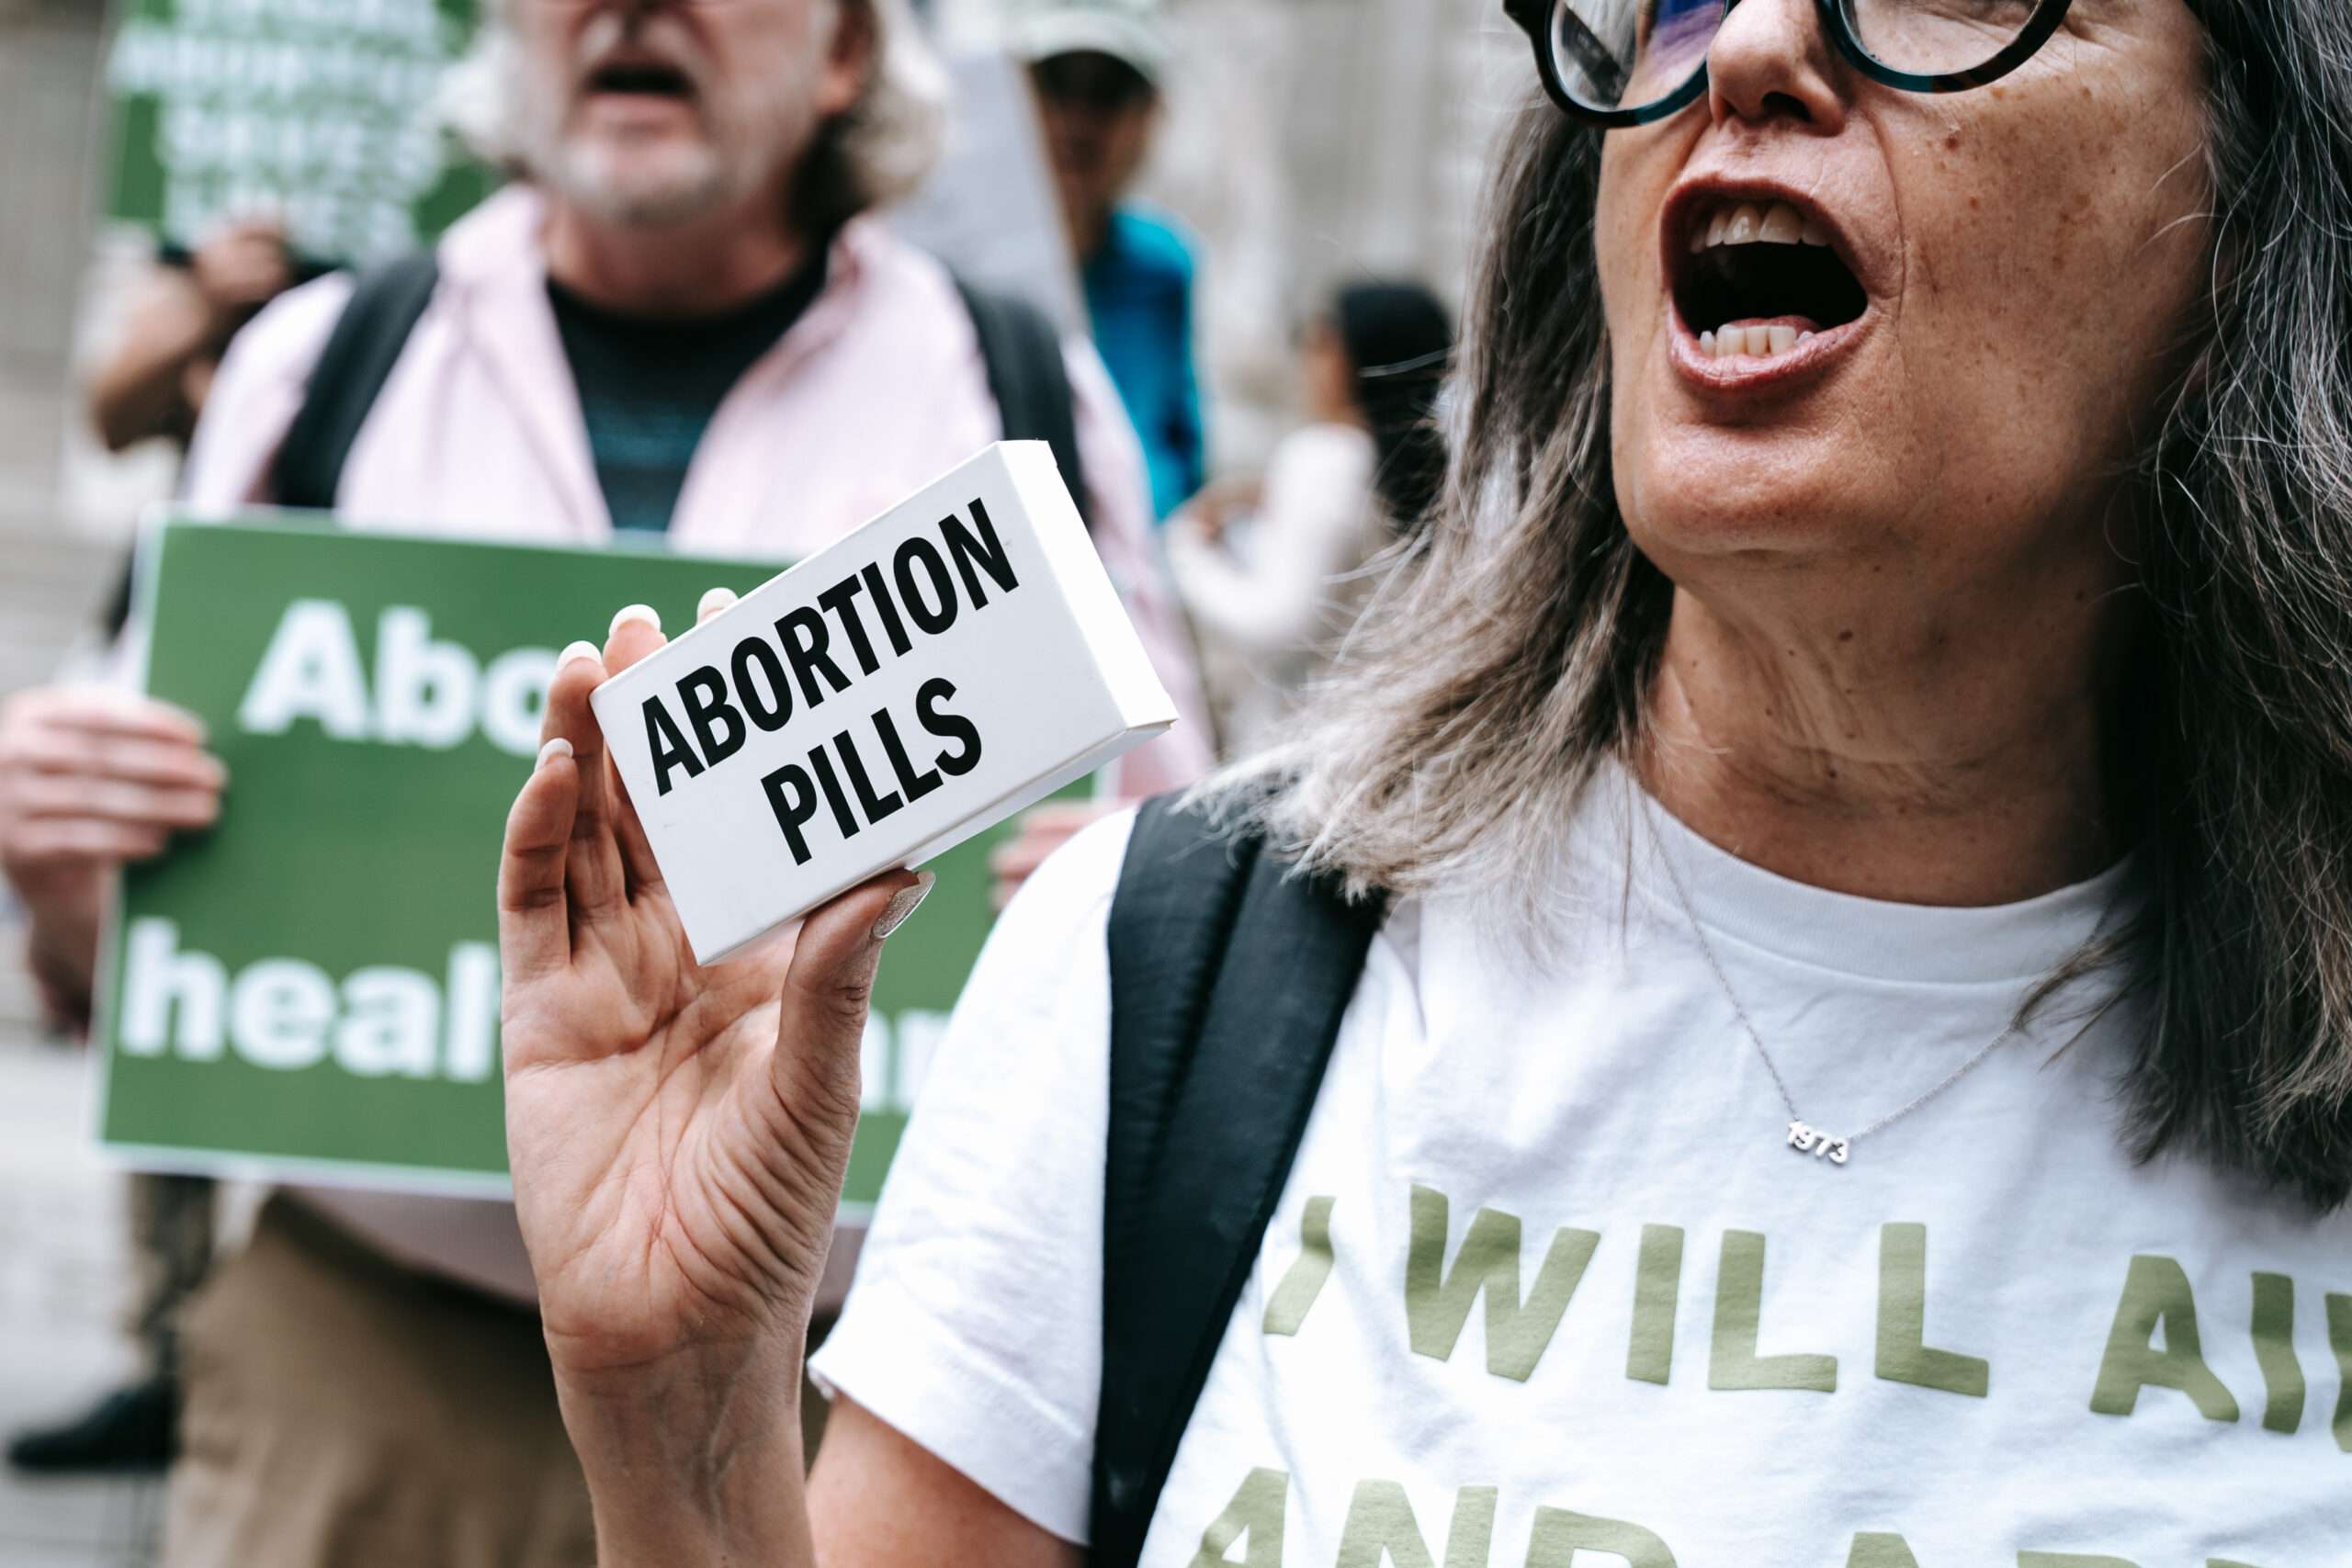 5th Circuit Court of Appeals Rules in Much Anticipated Abortion Pills Case